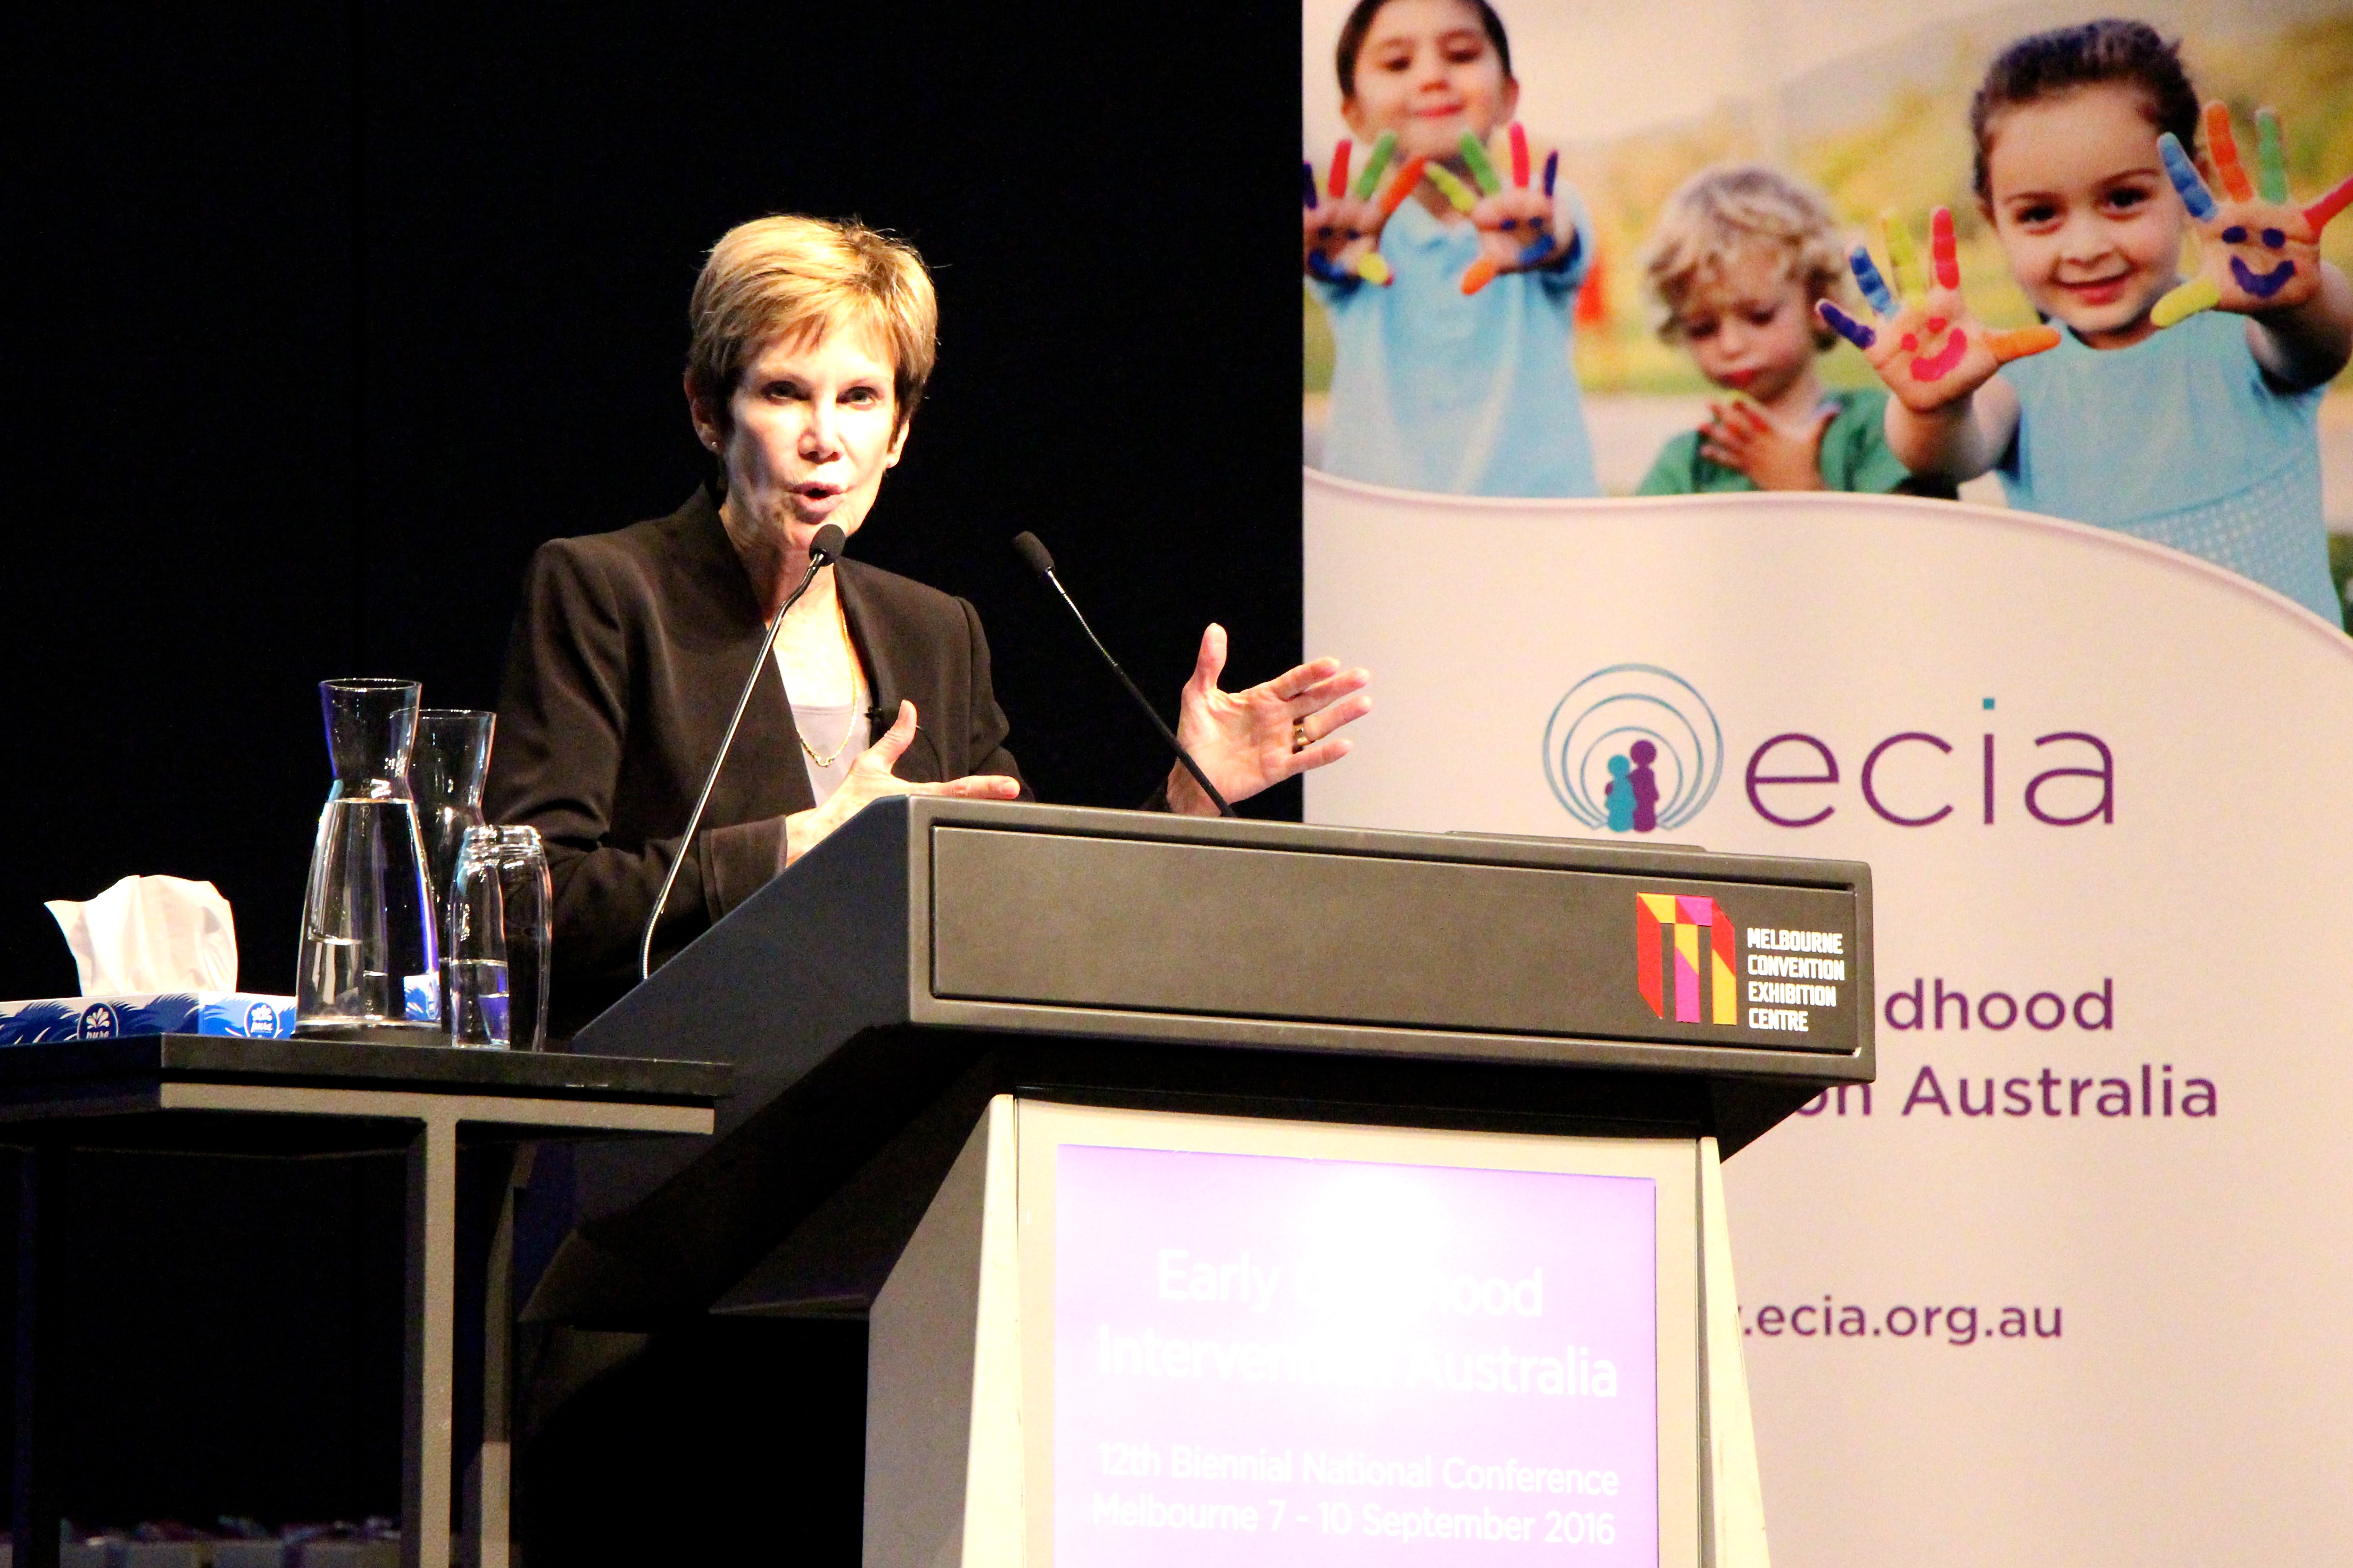 Mary McLean delivers a speech at a conference in Australia.